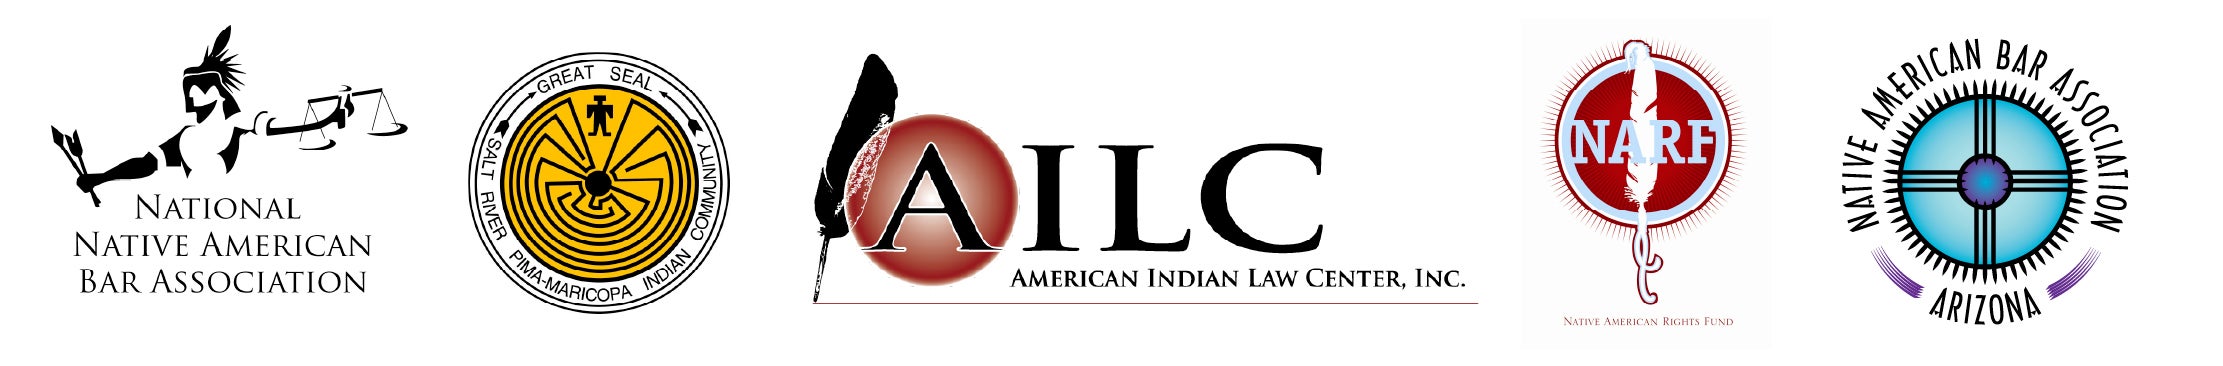 Logos for the American Indian Law Center, the Native American Bar Association of Arizona, the National Native American Bar Association, the Salt River Pima-Maricopa Indian Community and the Native American Rights Fund.